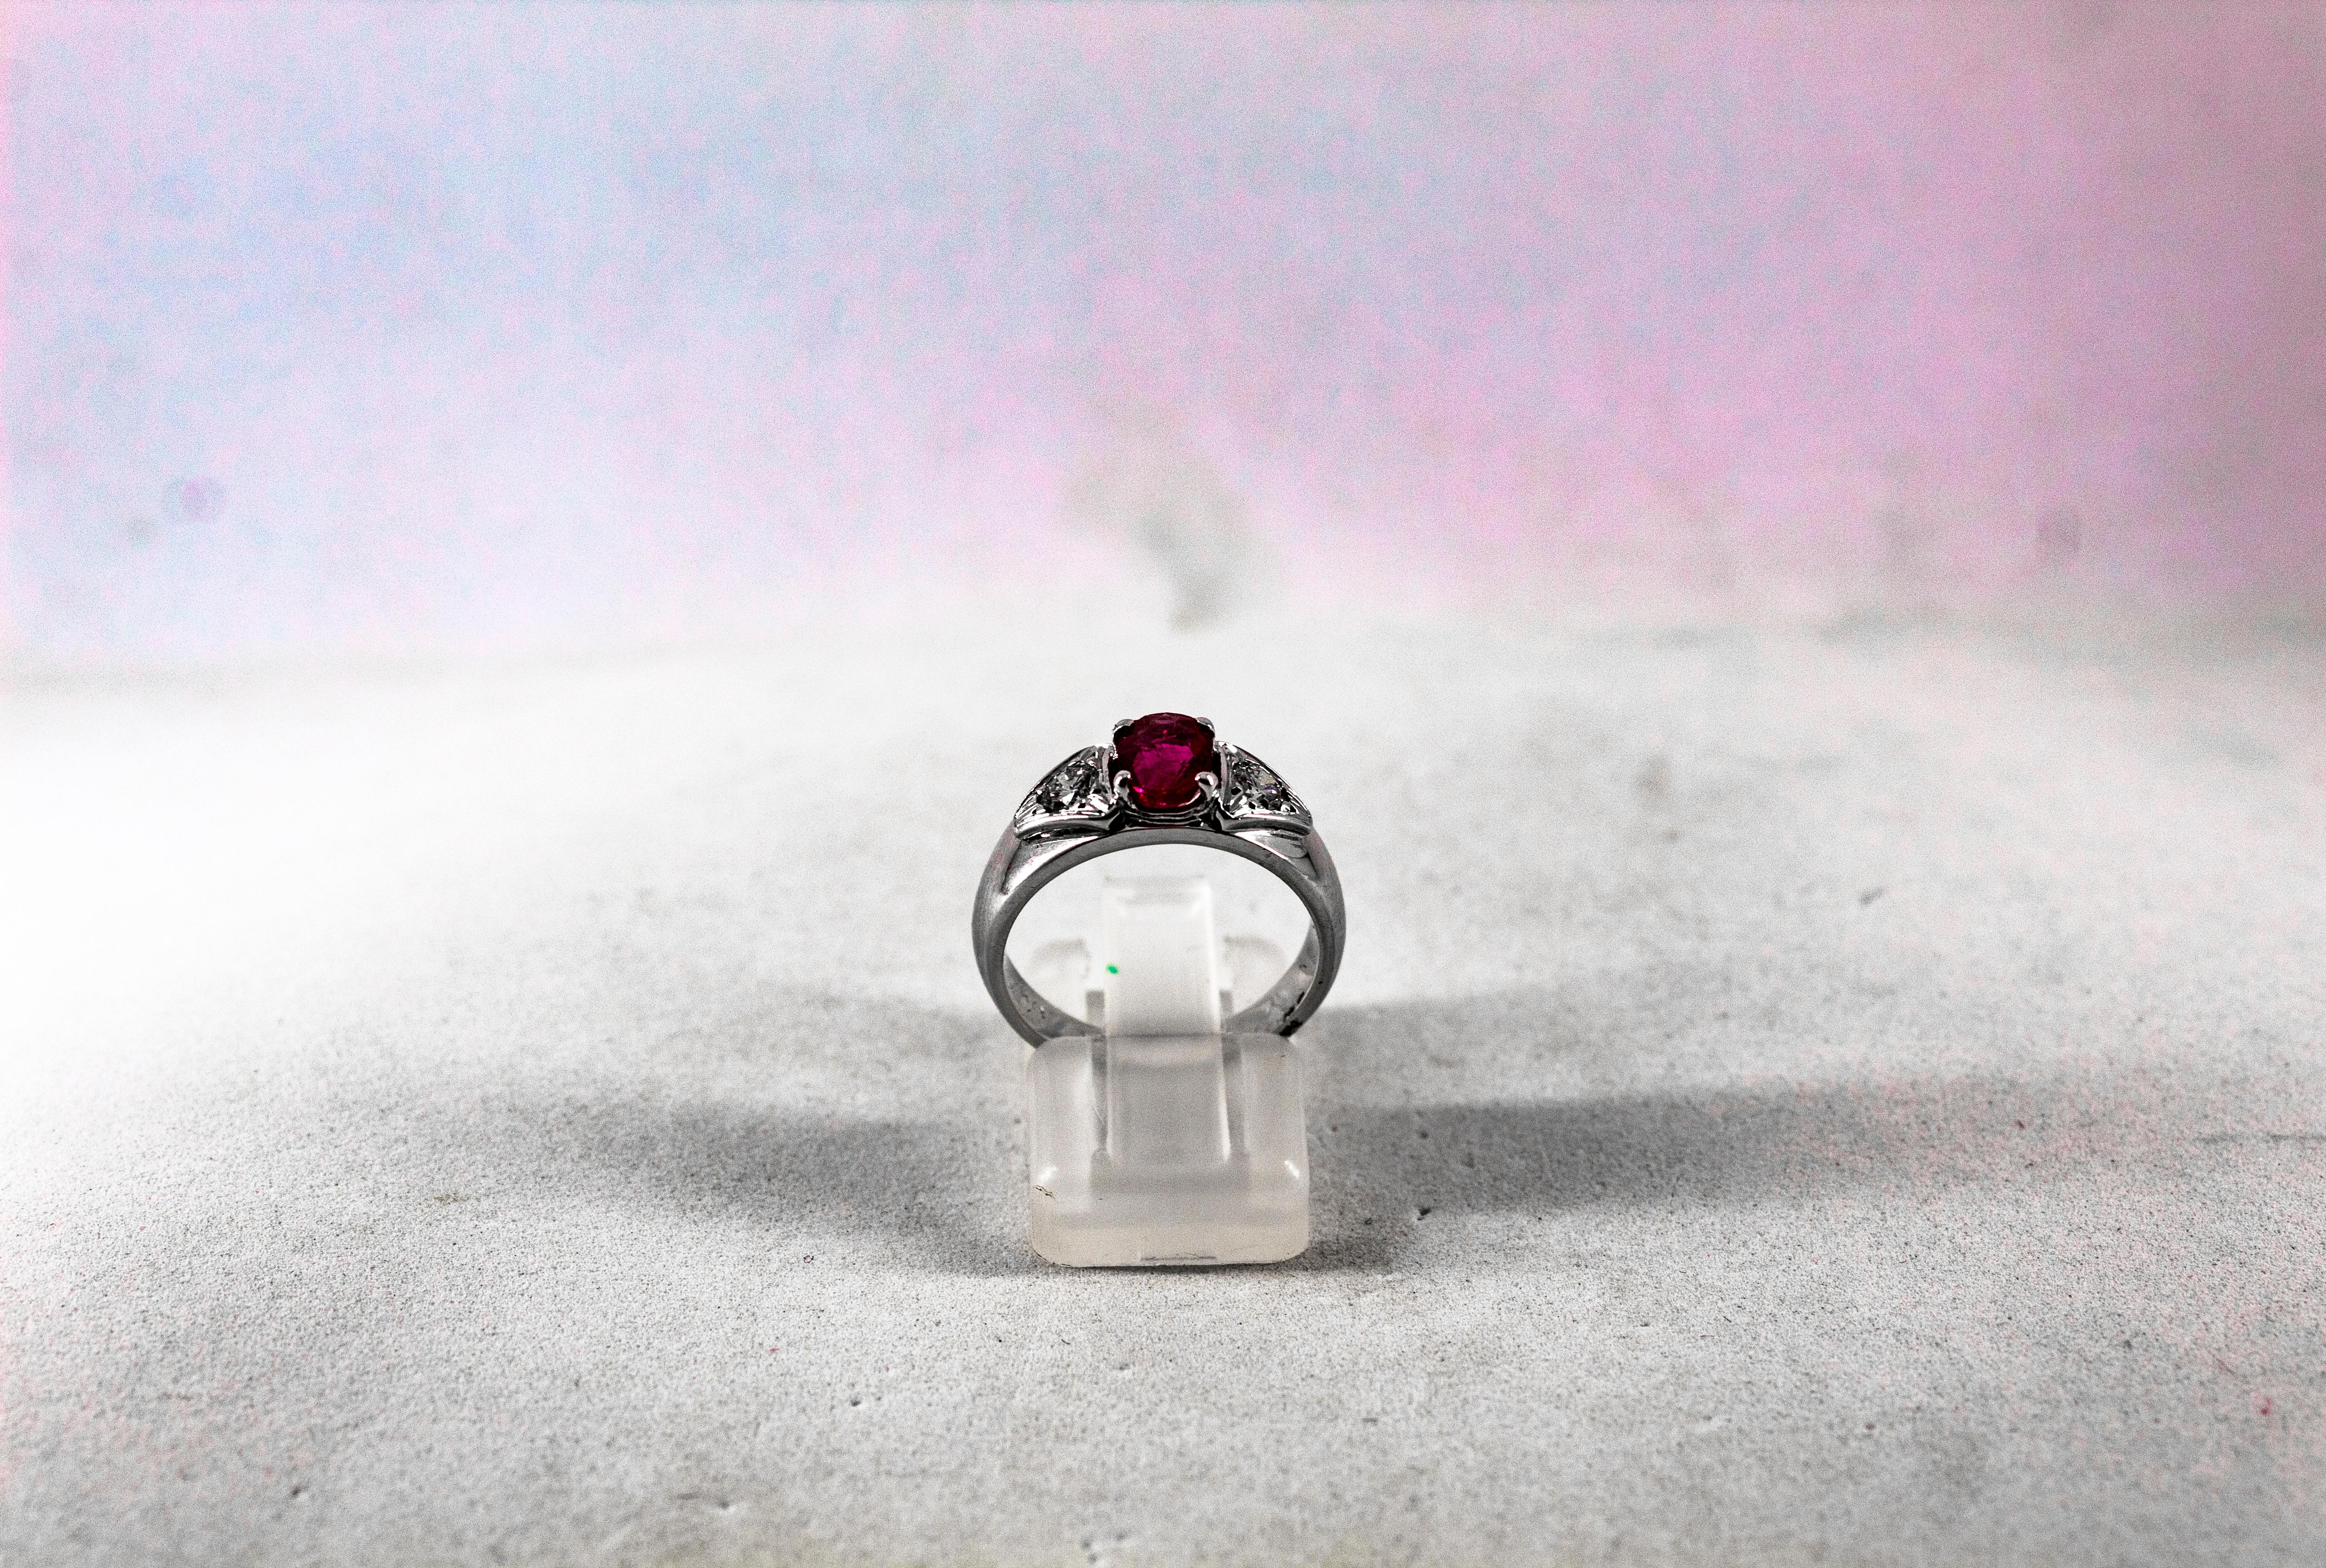 This Ring is made of 18K White Gold.
This Ring has 0.30 Carats of White Brilliant Cut Diamonds.
This Ring has a 0.80 Carats Oval Cut Ruby.
Size ITA: 12 USA: 6

We're a workshop so every piece is handmade, customizable and resizable.